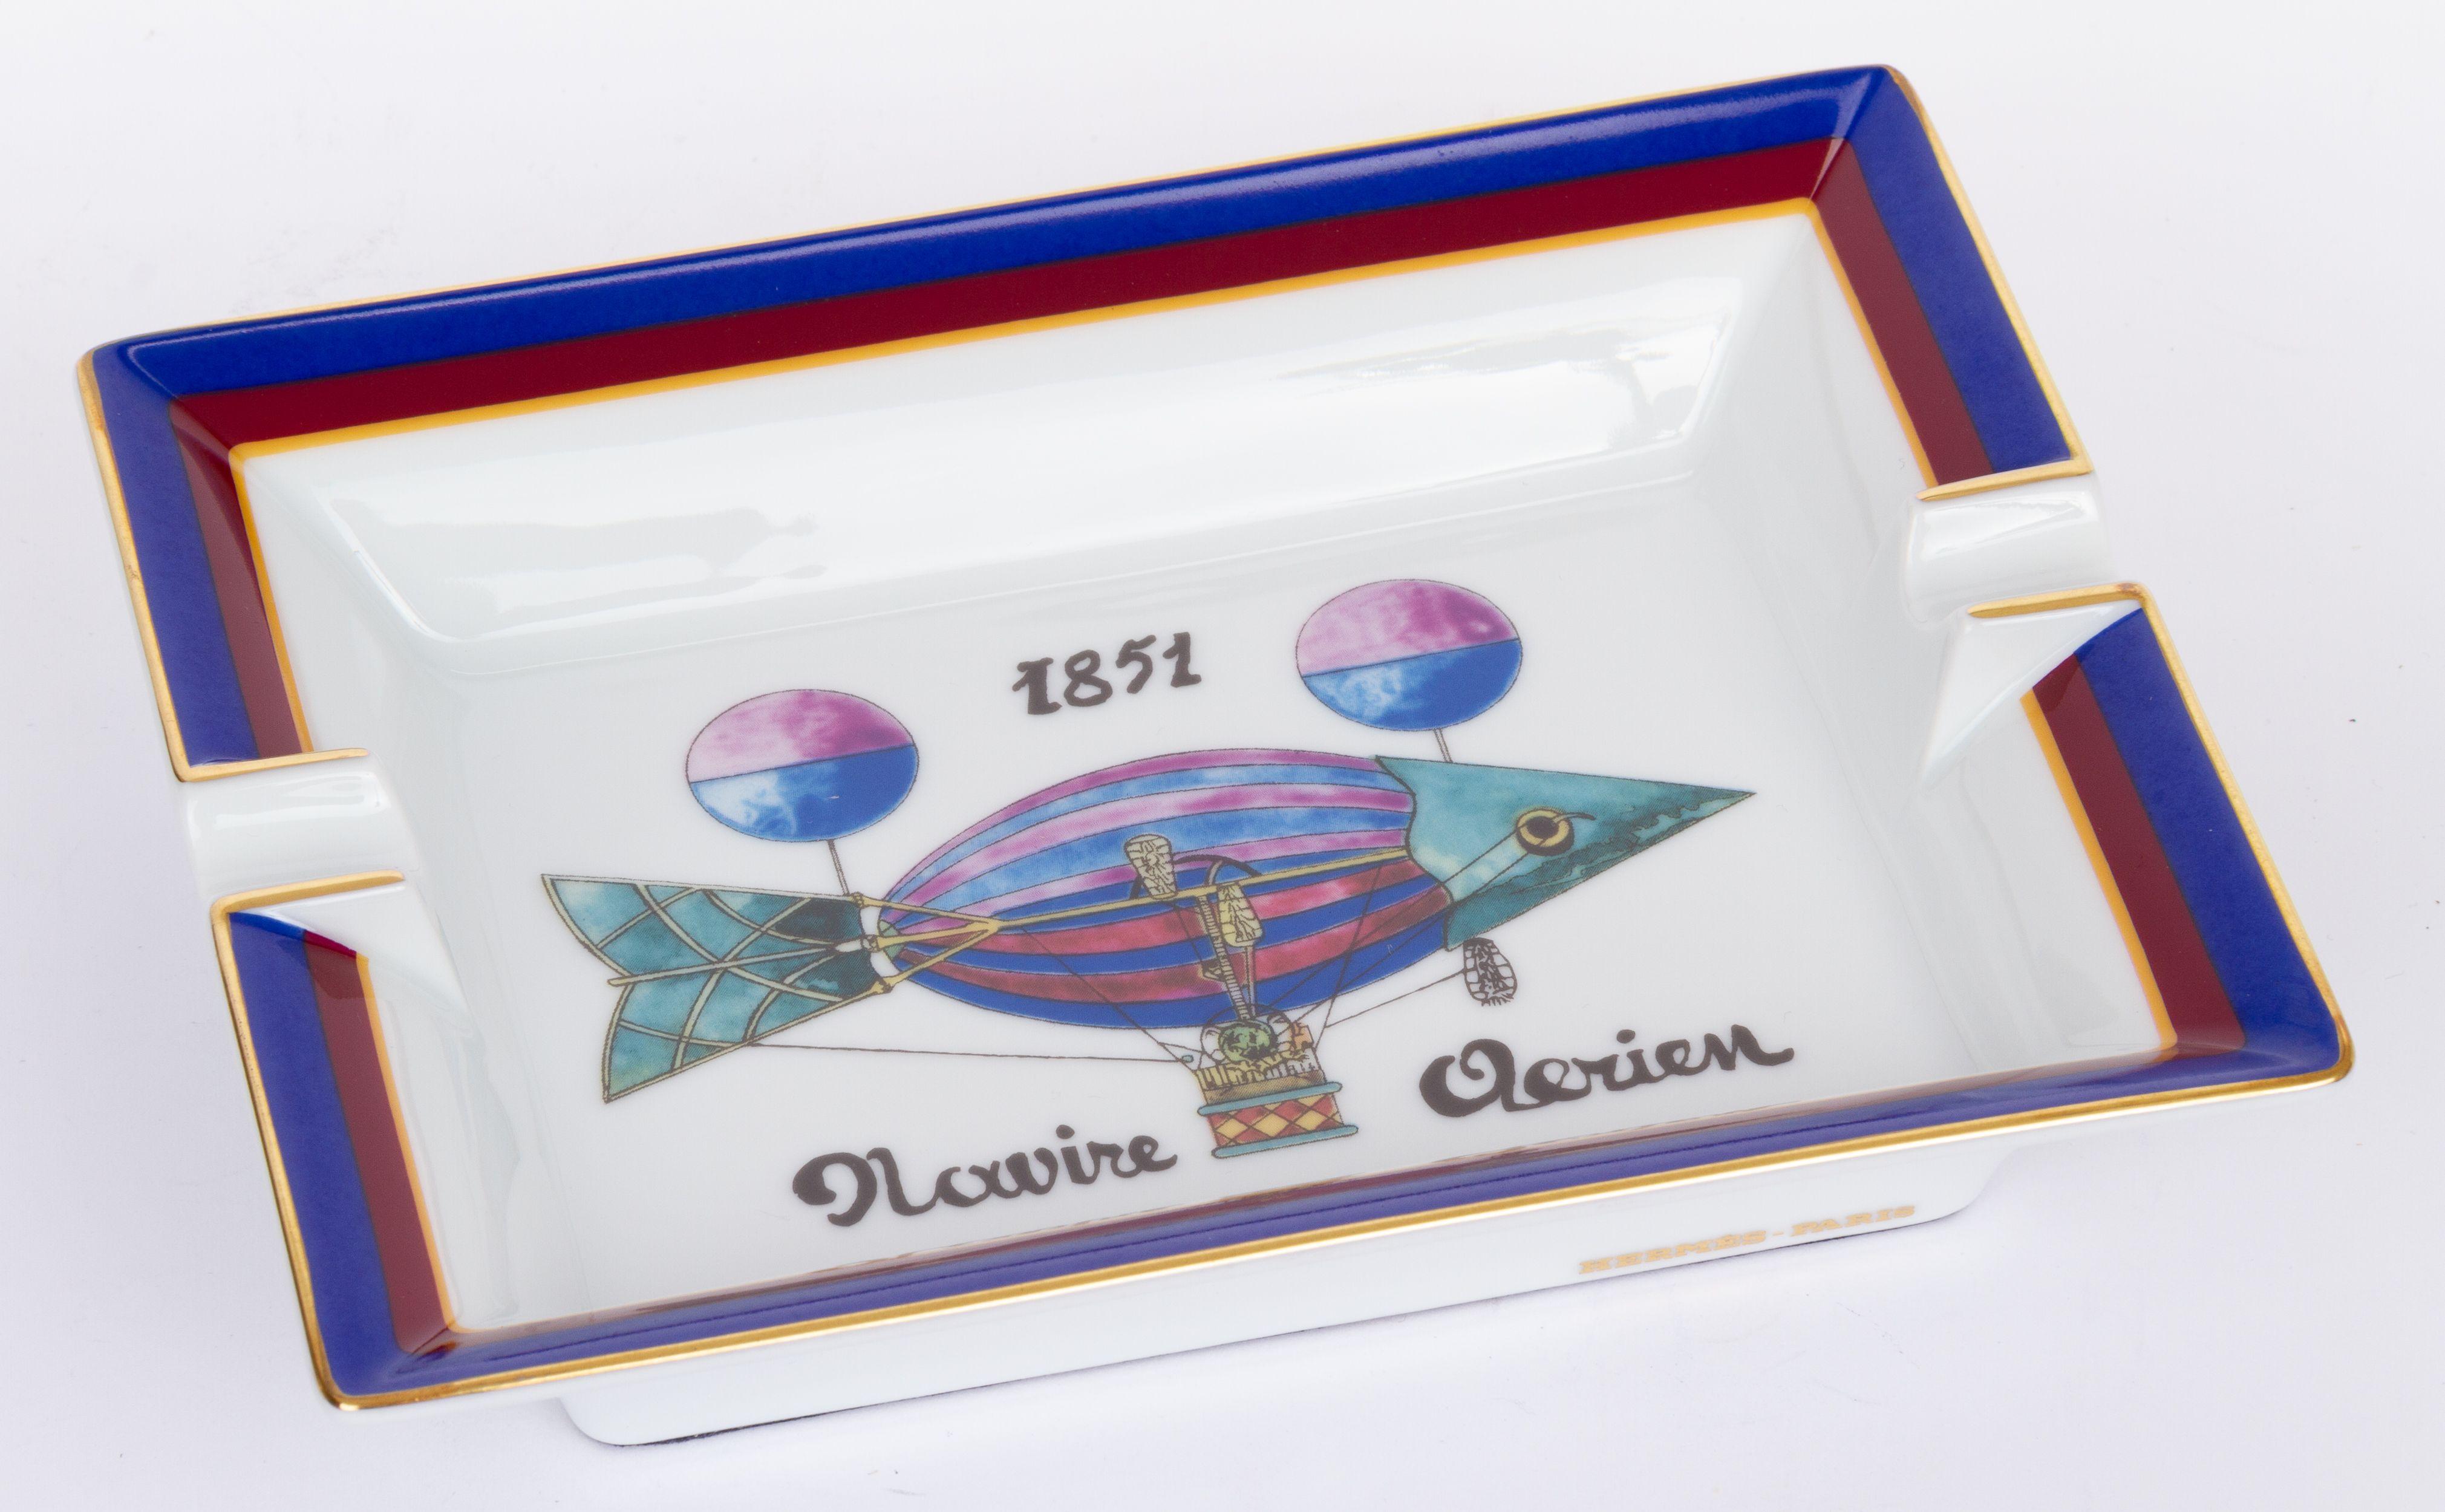 Hermès vintage ashtray from the Navire Aerien 1851 edition. In the center of the ashtray you can see a printed rigid airship. The piece is in excellent condition.
